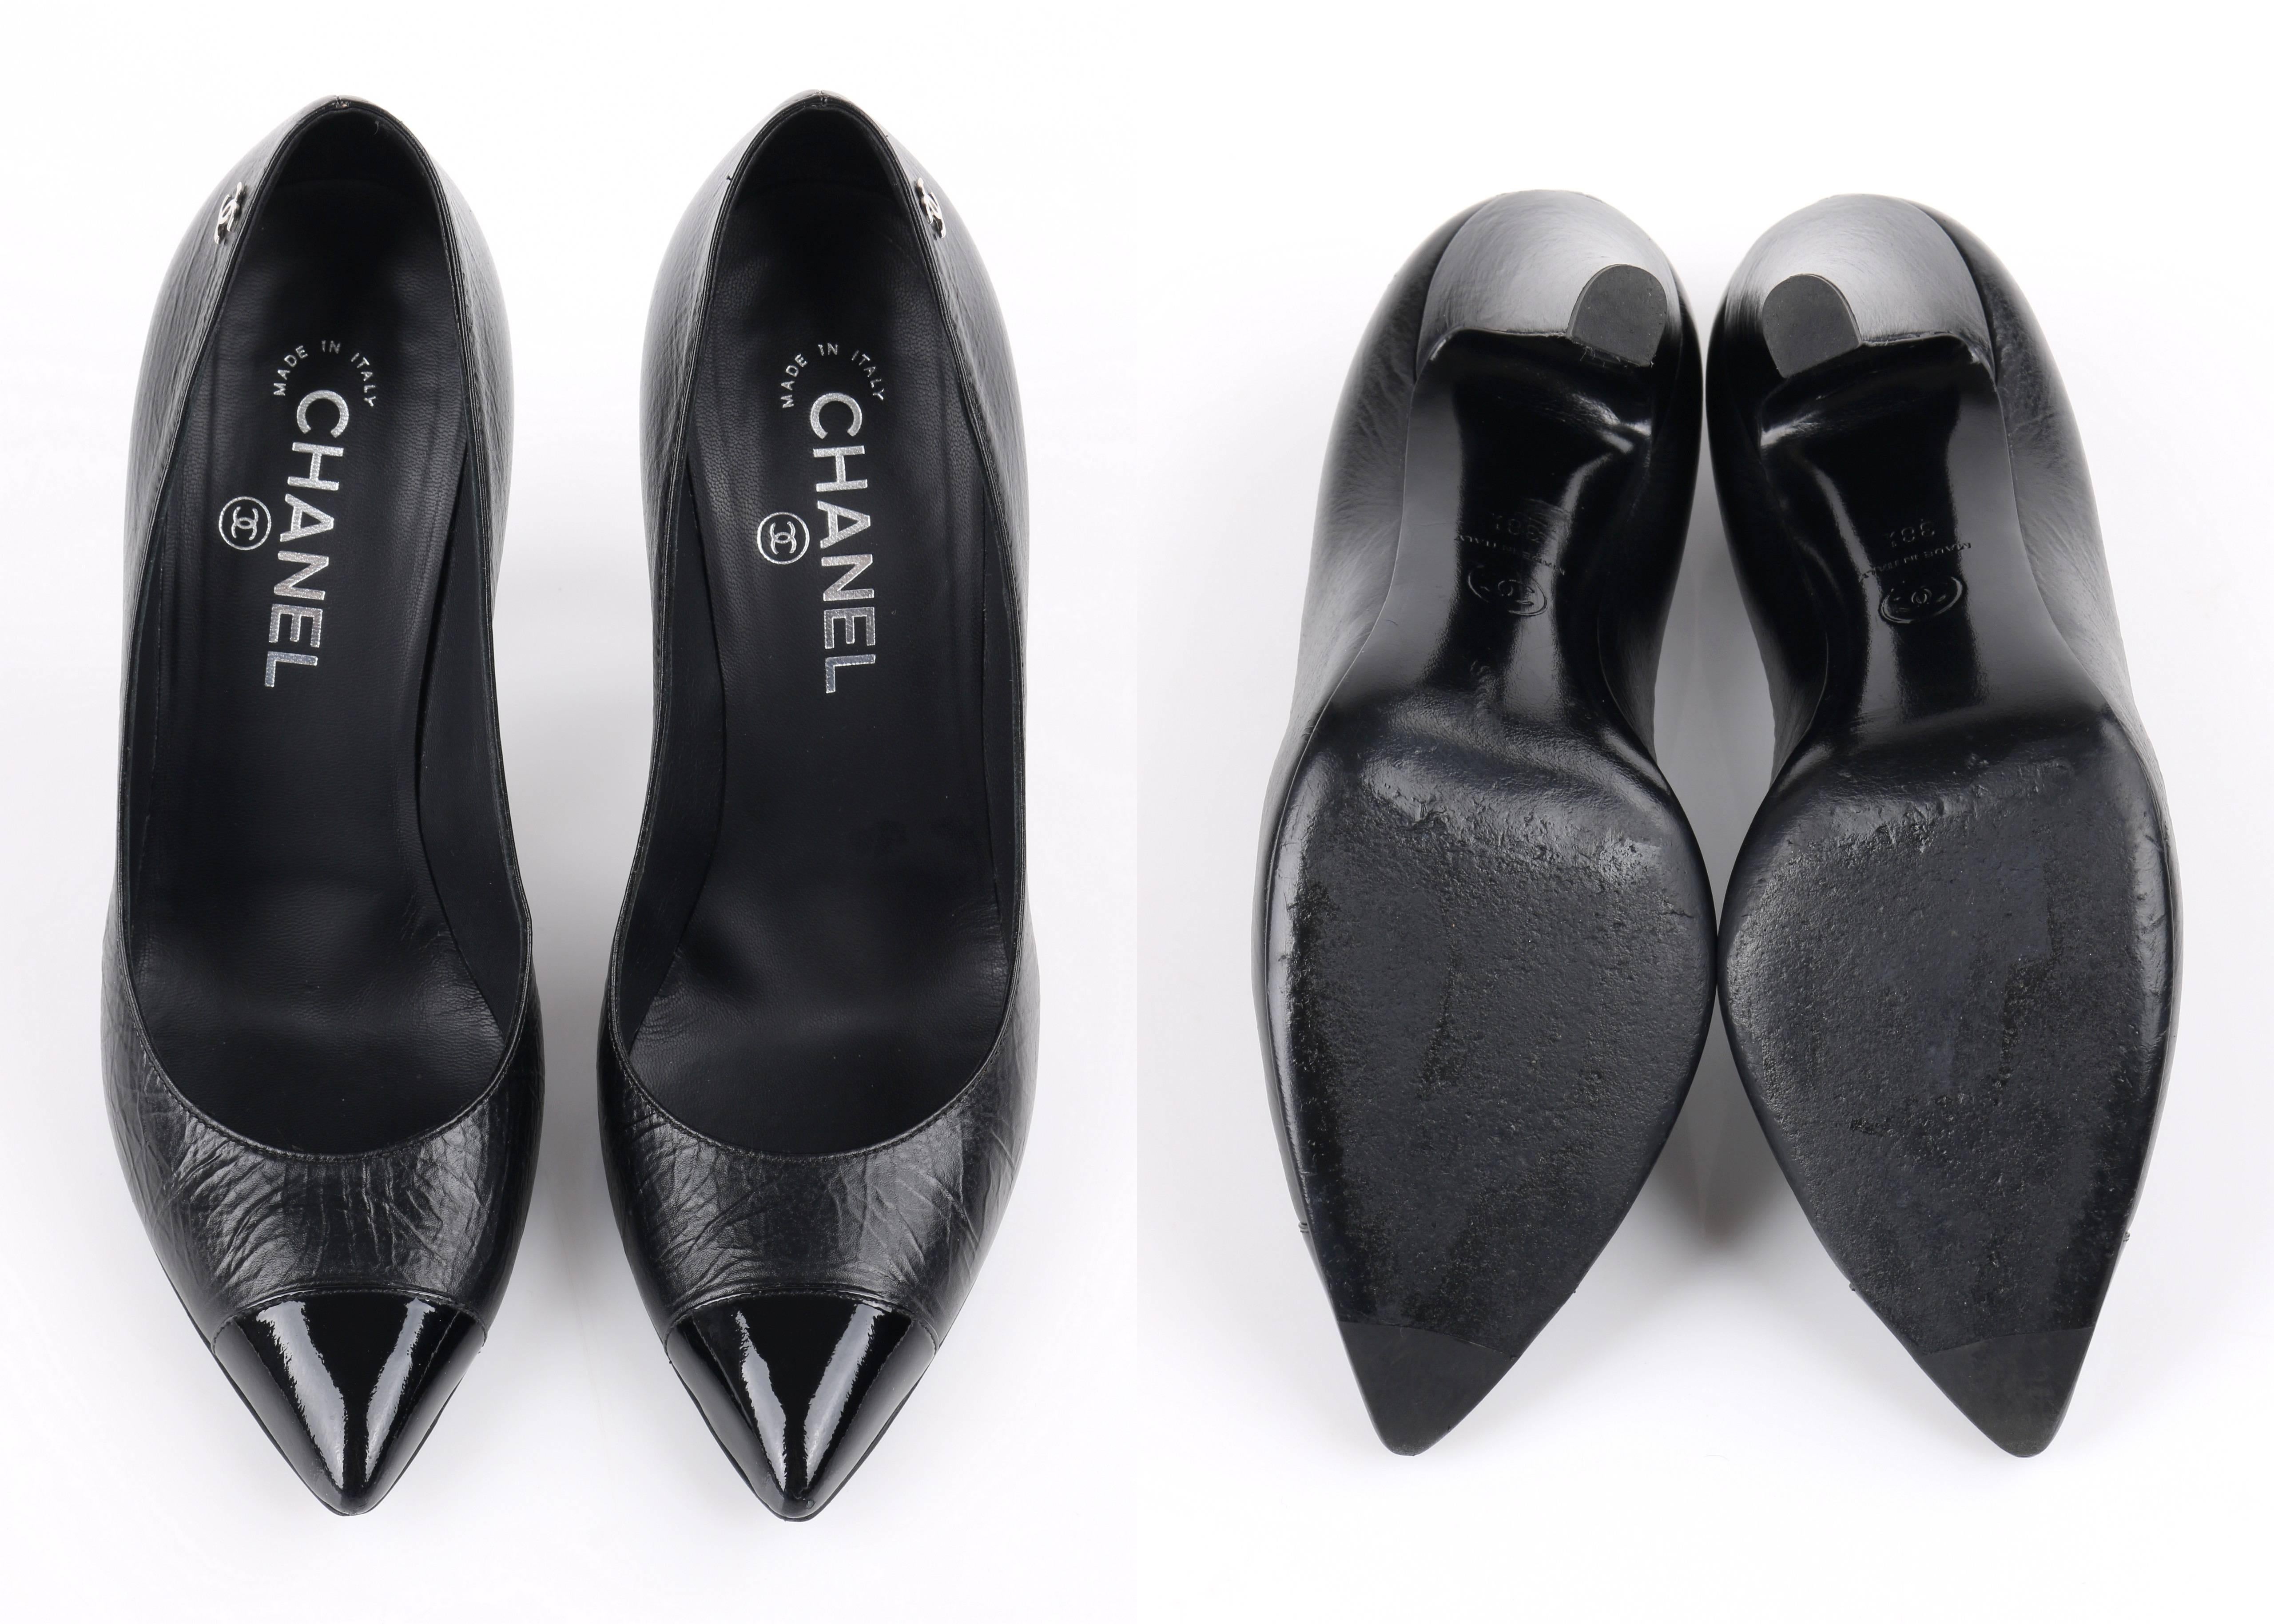 CHANEL Cruise 2014 Black Textured Leather Pointed Cap Toe Pumps Heels 1